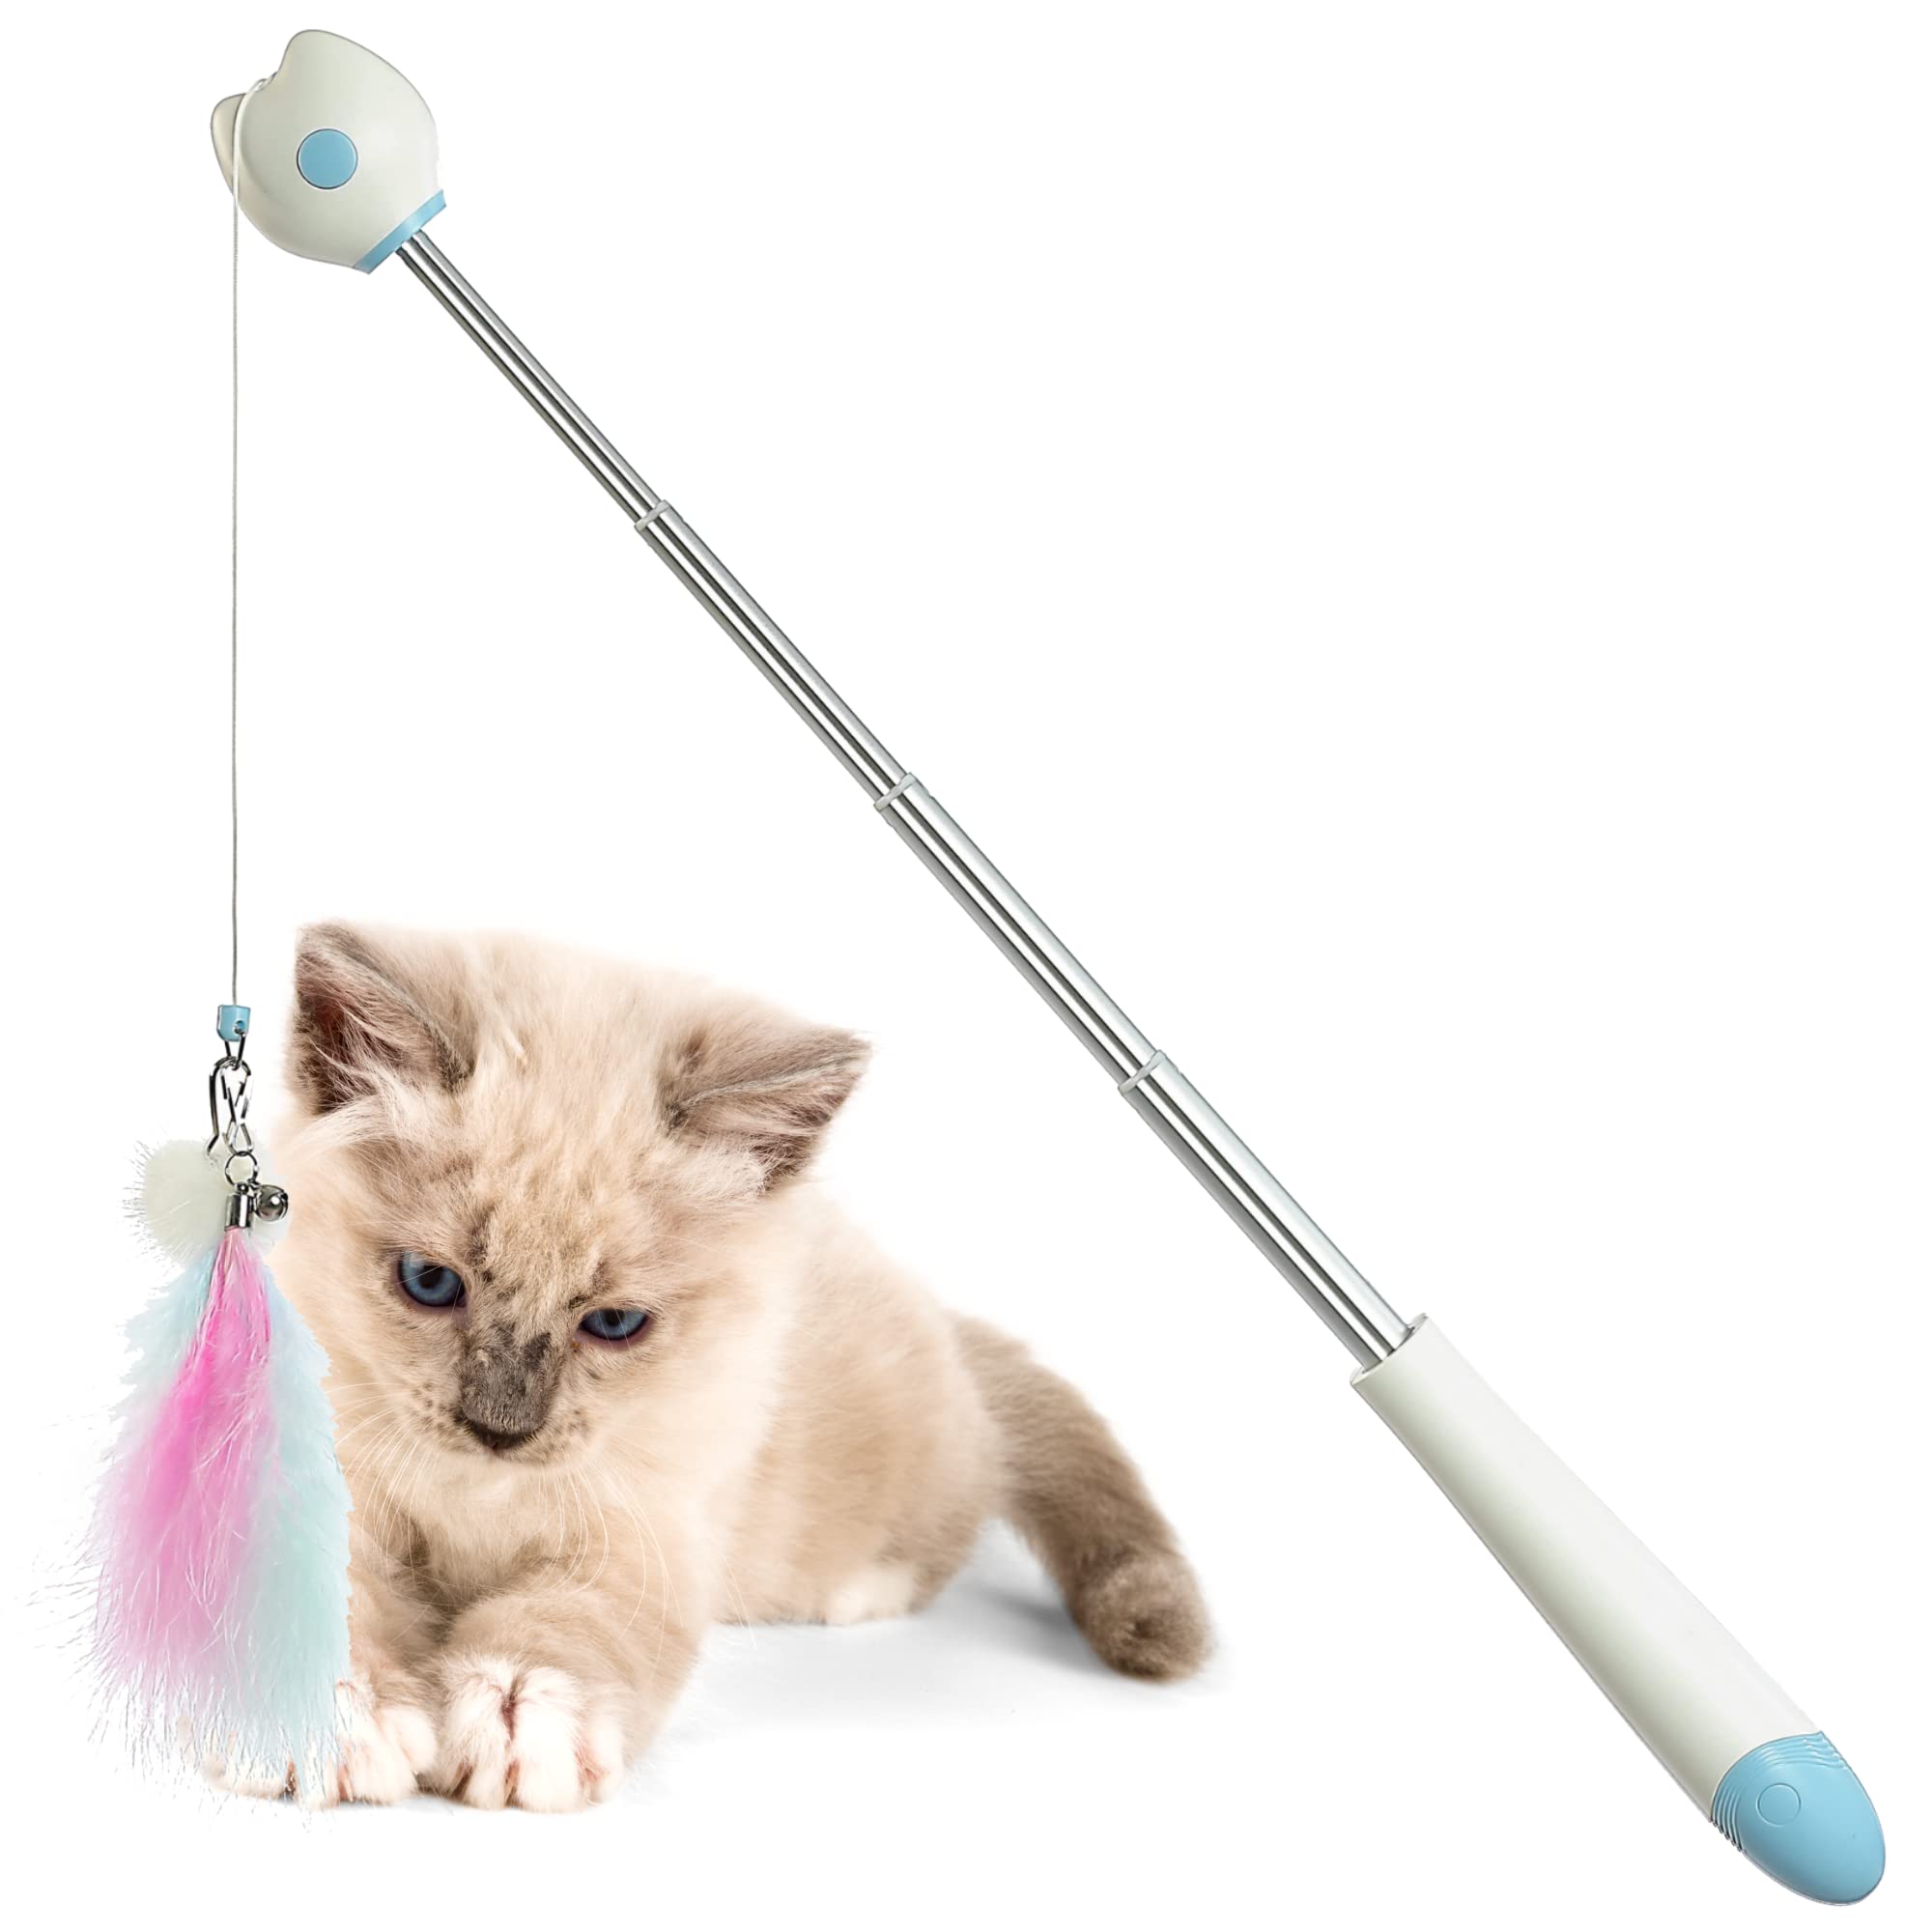 Aelevate Cat Teaser Toy, Retractable Cat String Toy